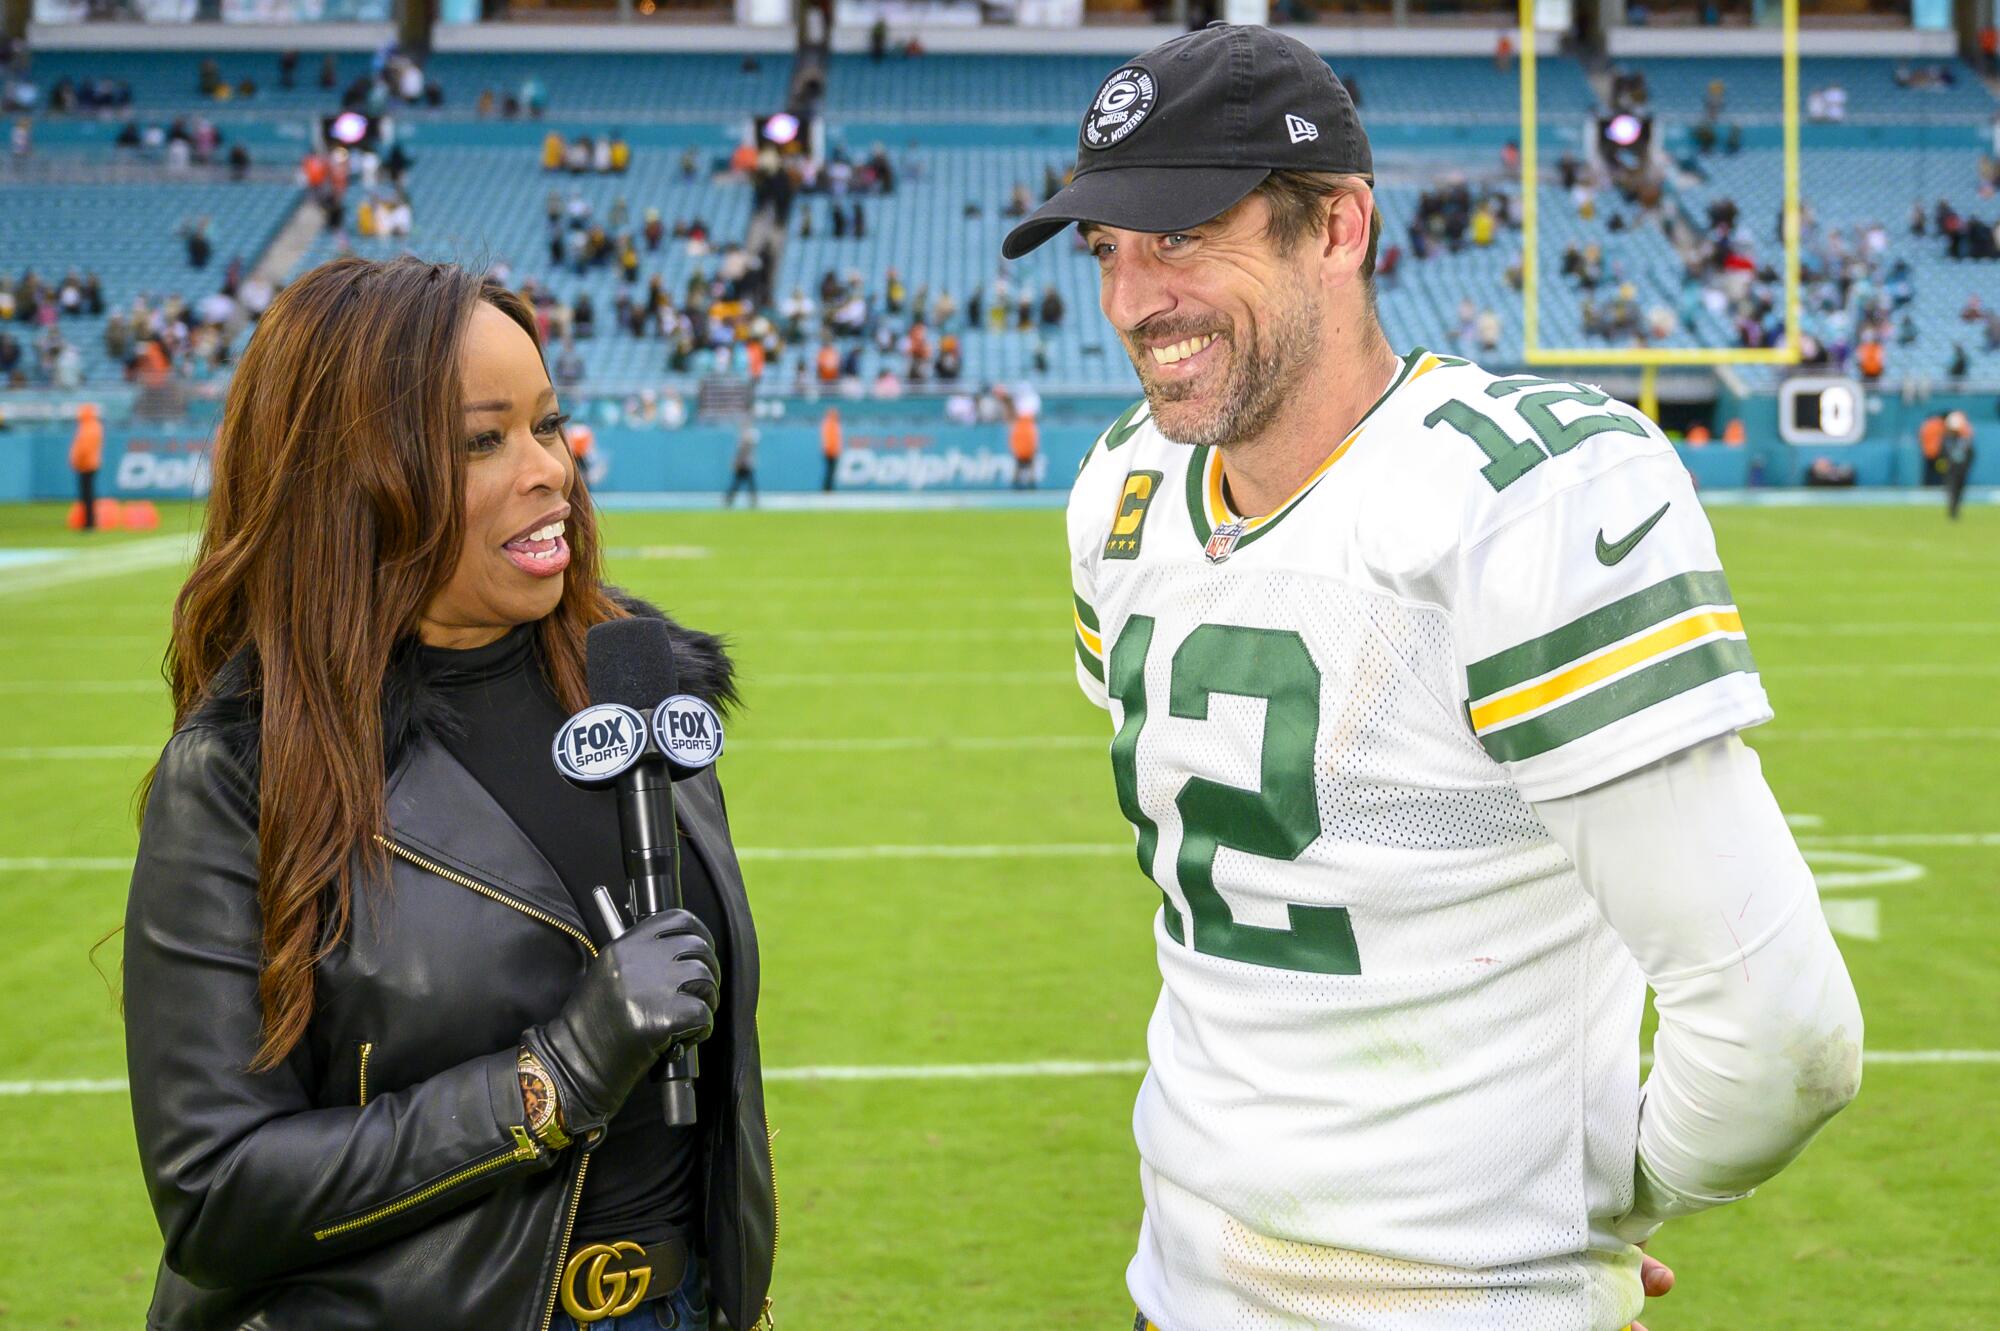 Fox Sports sideline reporter Pam Oliver interviews Packers quarterback Aaron Rodgers on the field 